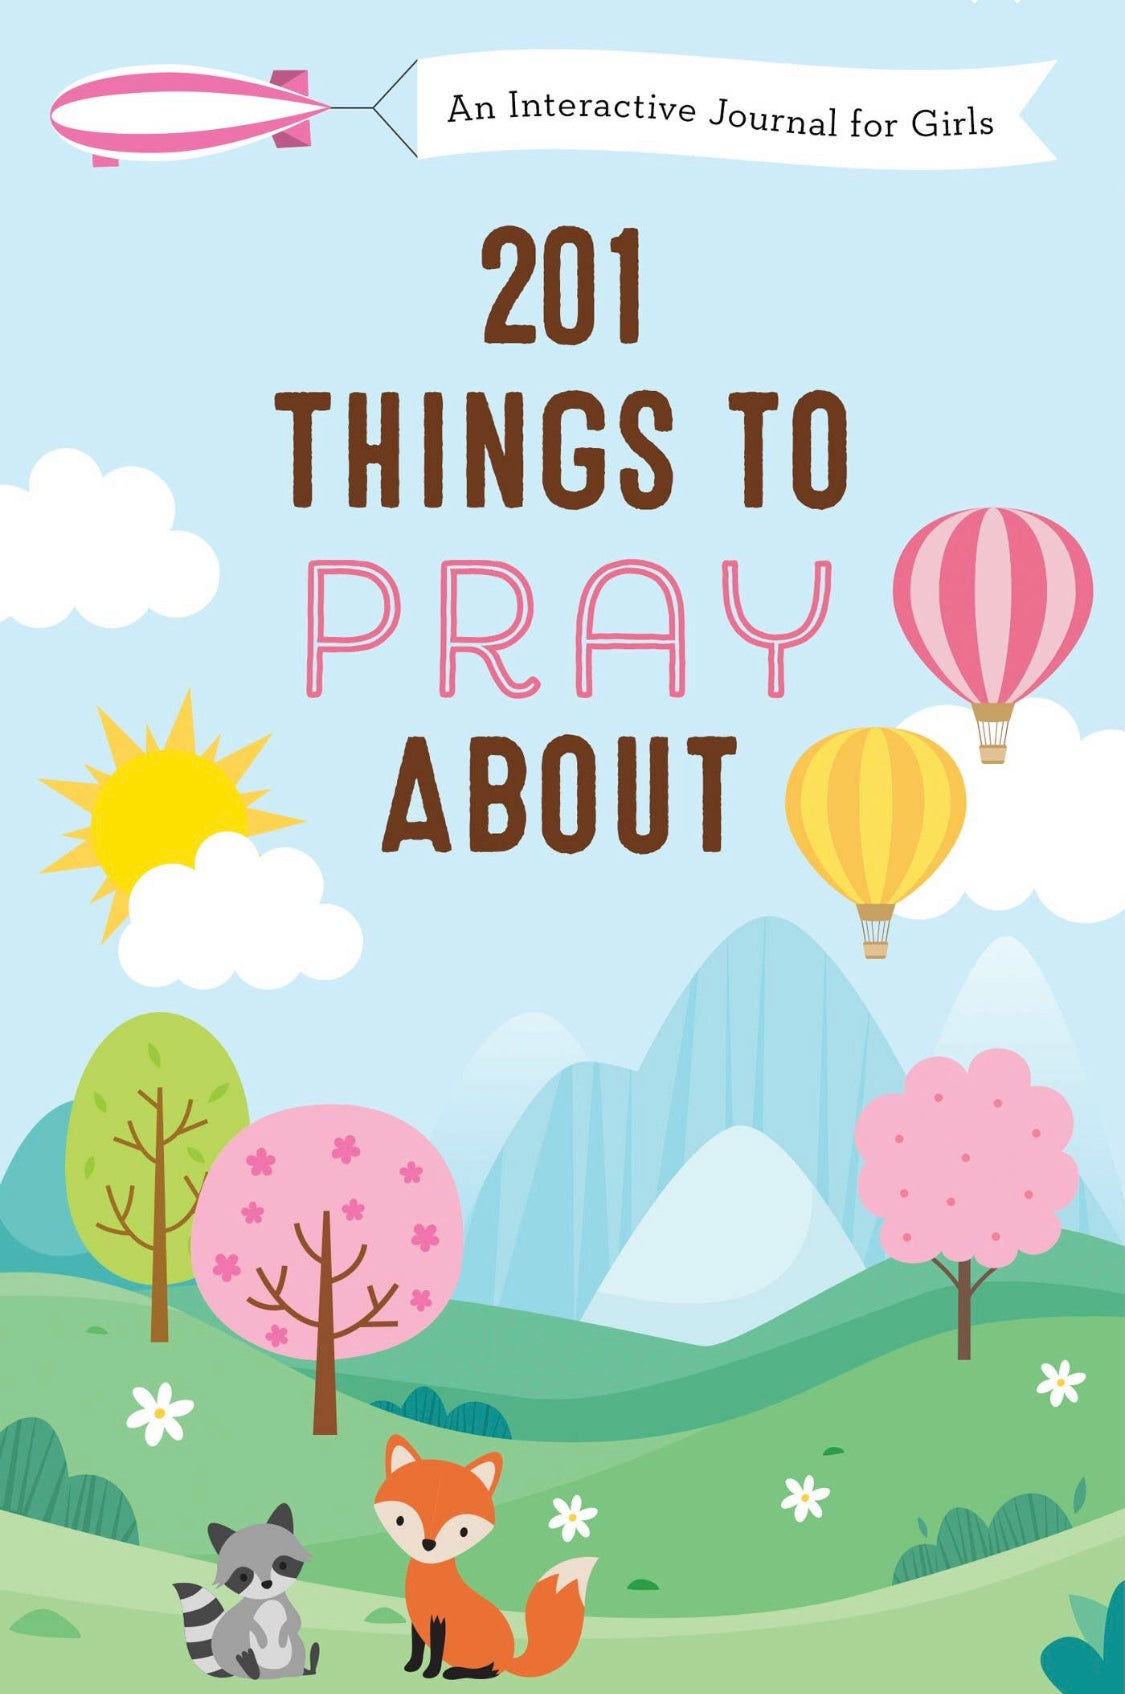 201 Things to Pray About for Girls